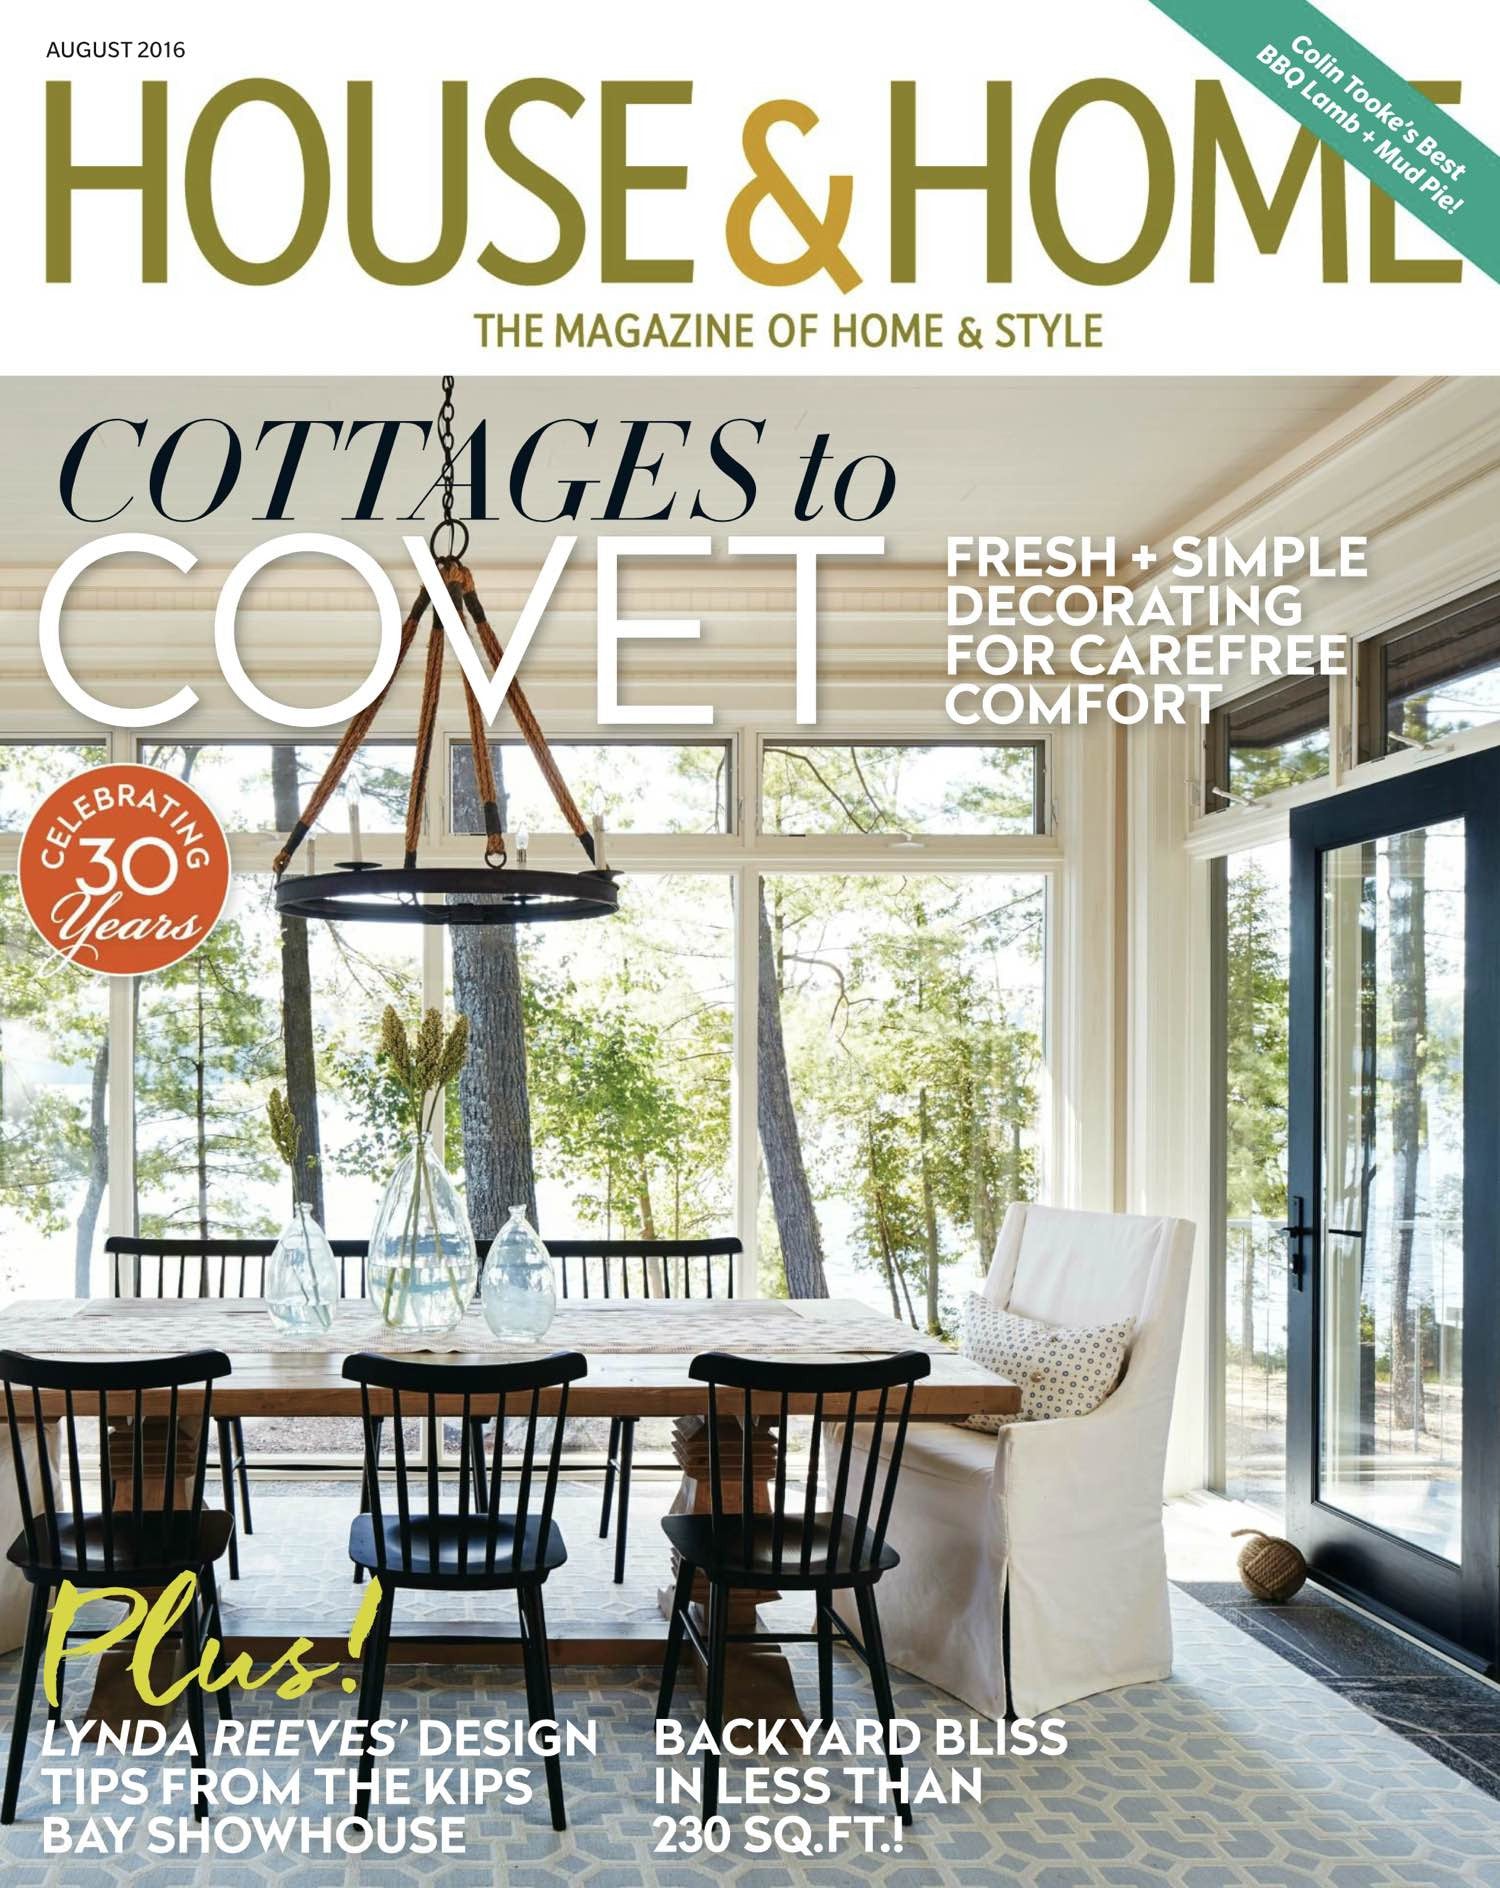 House & Home Magazine - August 2016